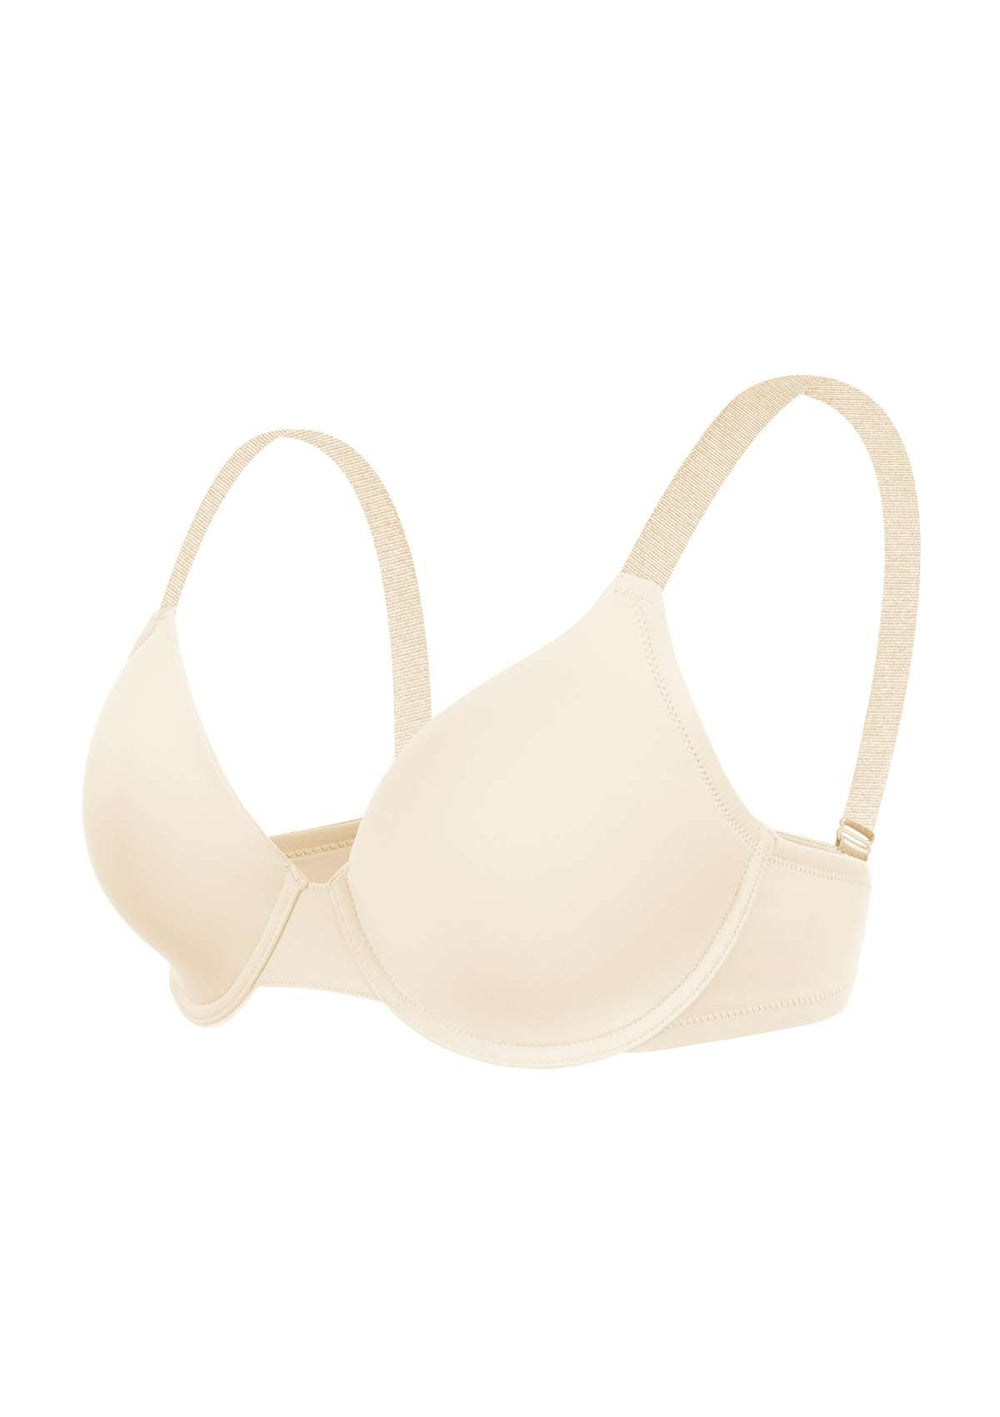 HSIA Smooth Everyday T-shirt Bra For Small Bust